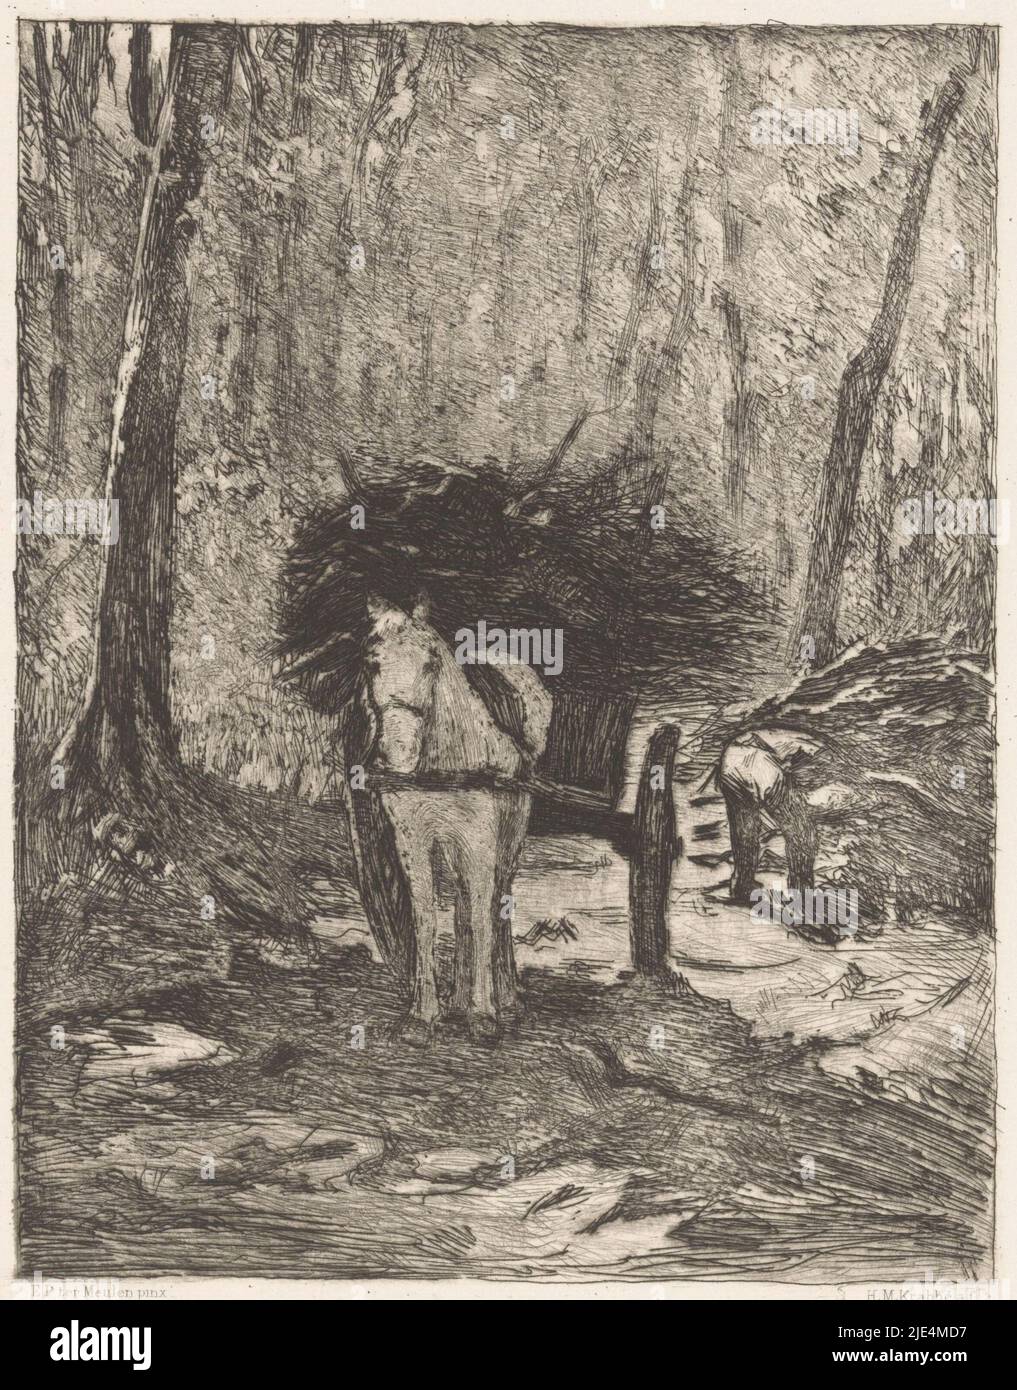 In the woods, Heinrich M. Krabbé, after François Pieter ter Meulen, 1878 - 1931, On a forest path stands a horse and cart loaded with gleaning wood. To the right, a man bending over picks up branches from the ground., print maker: Heinrich M. Krabbé, (mentioned on object), after: François Pieter ter Meulen, printer: J.B. van Campenhout, Brussels, 1878 - 1931, paper, etching, h 217 mm × w 147 mm Stock Photo